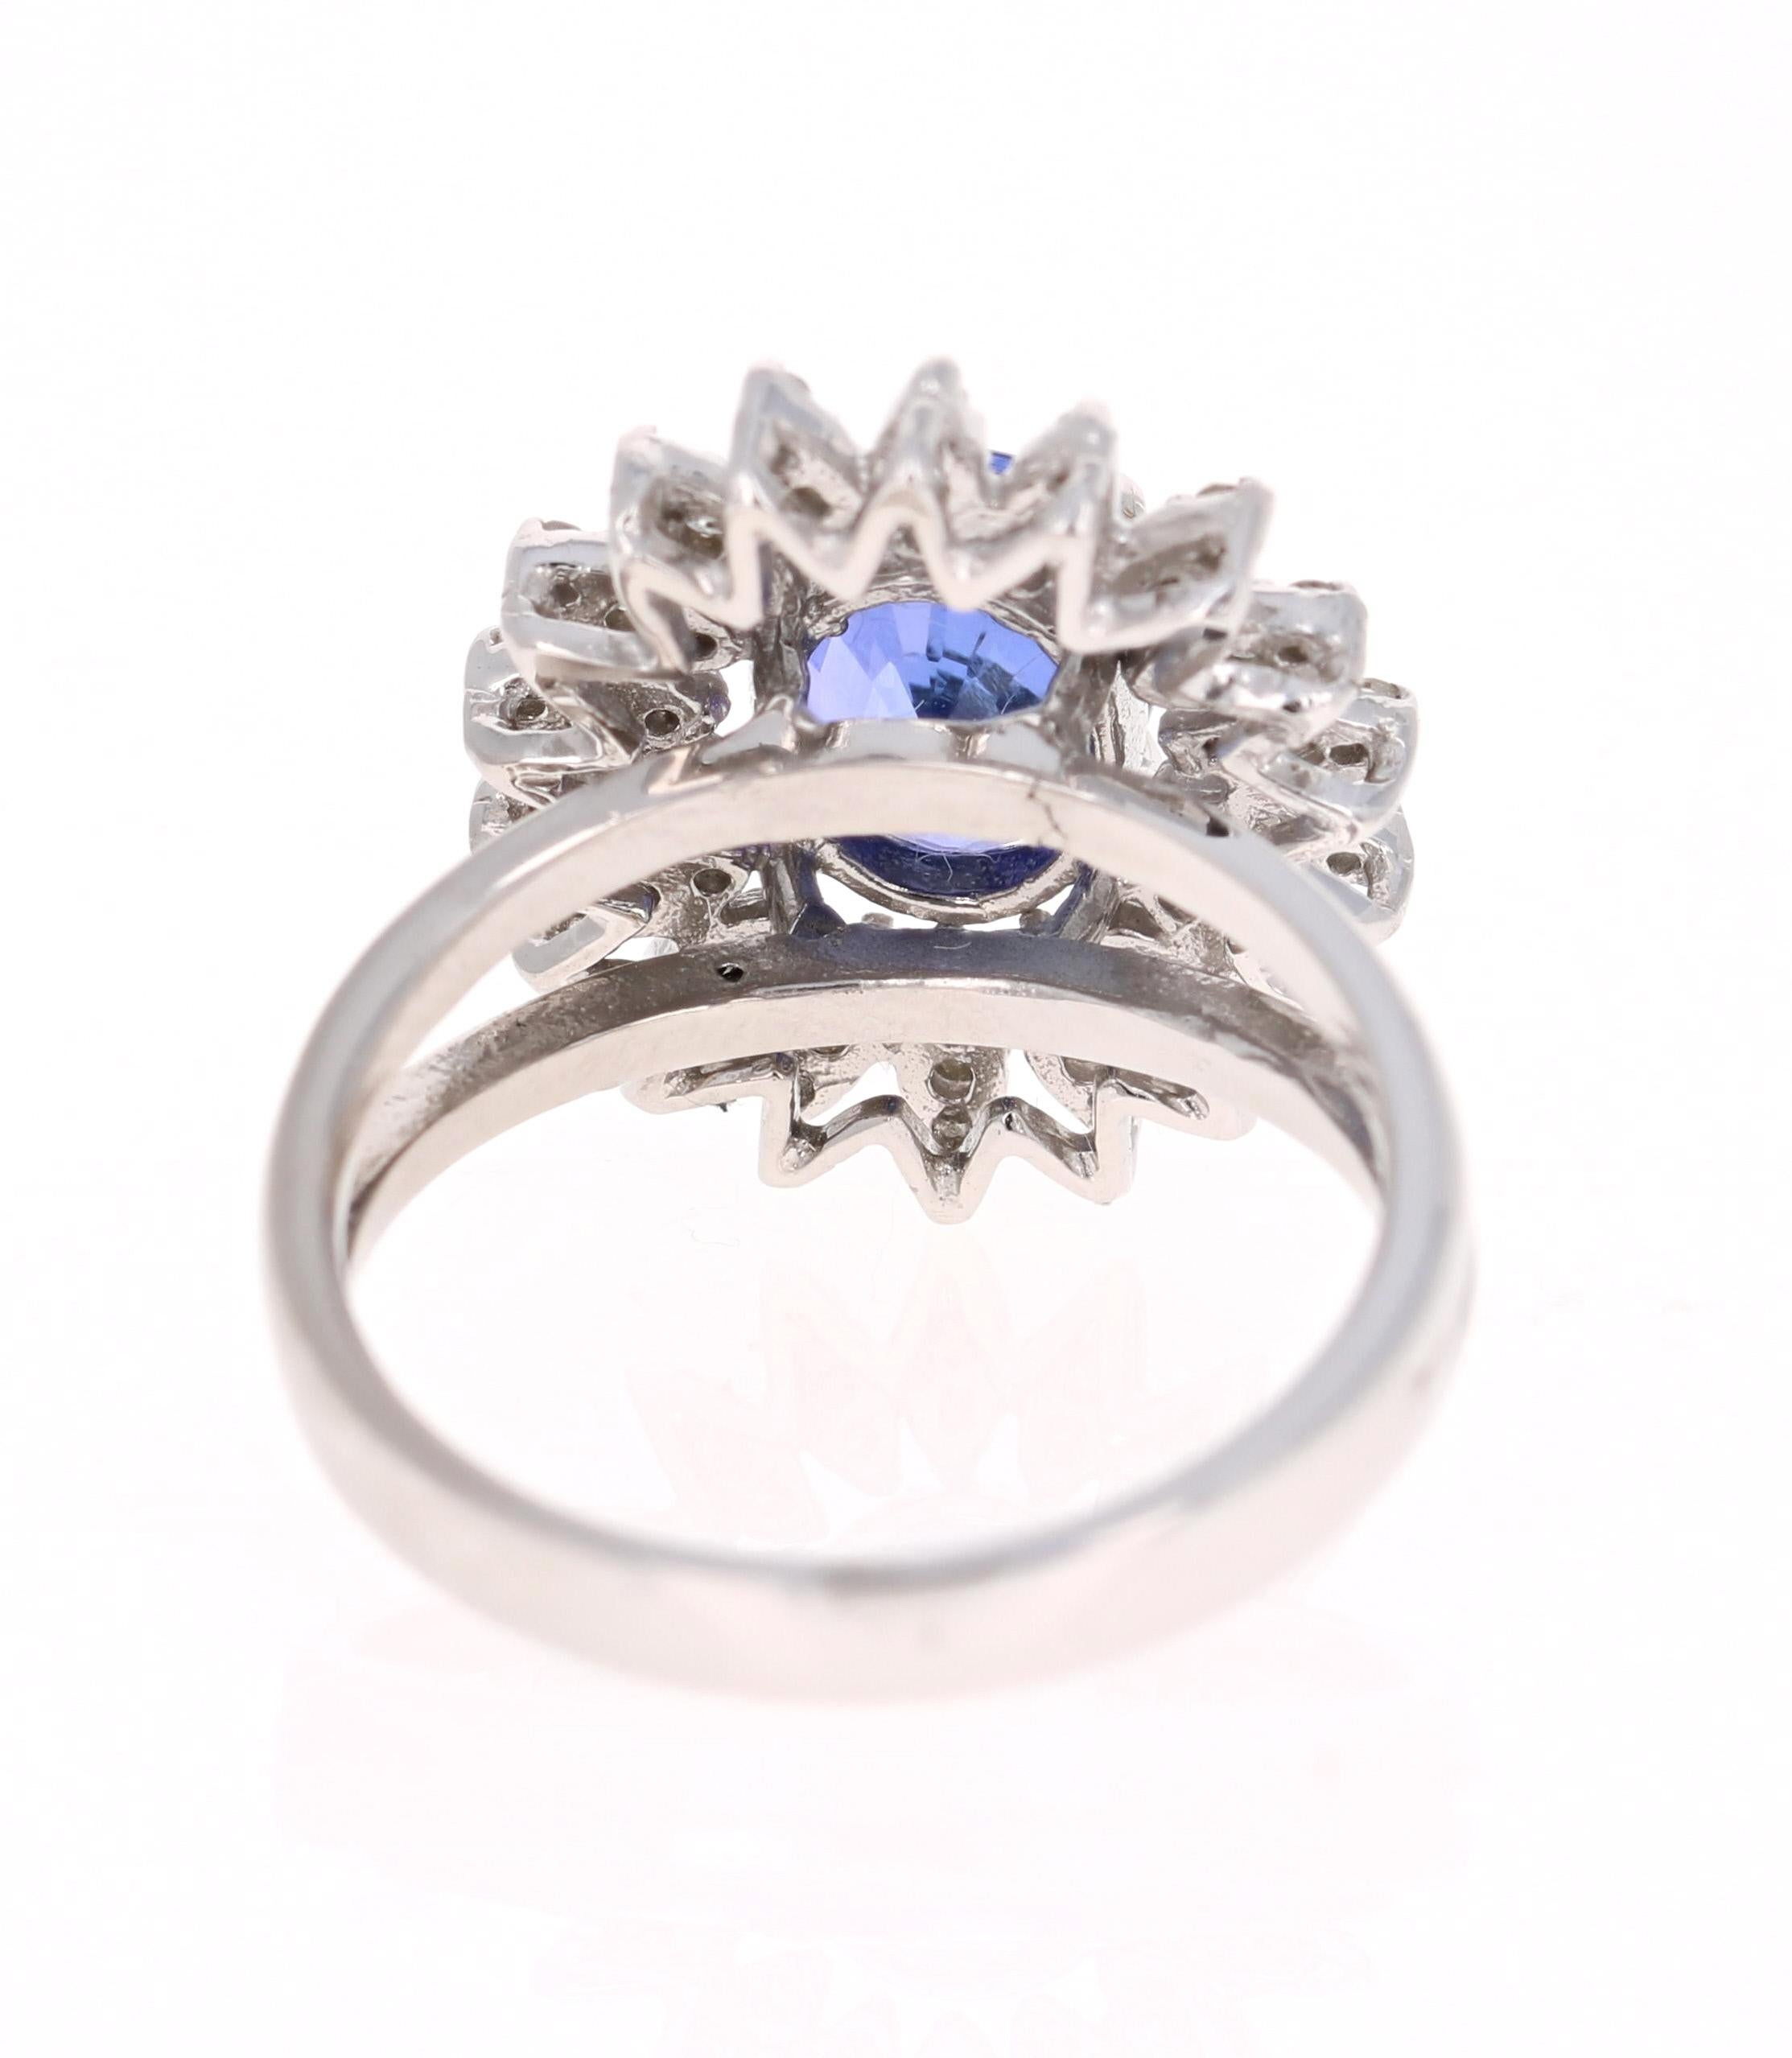 2.48 Carat Tanzanite Diamond 14 Karat Cocktail Ring In New Condition For Sale In Los Angeles, CA